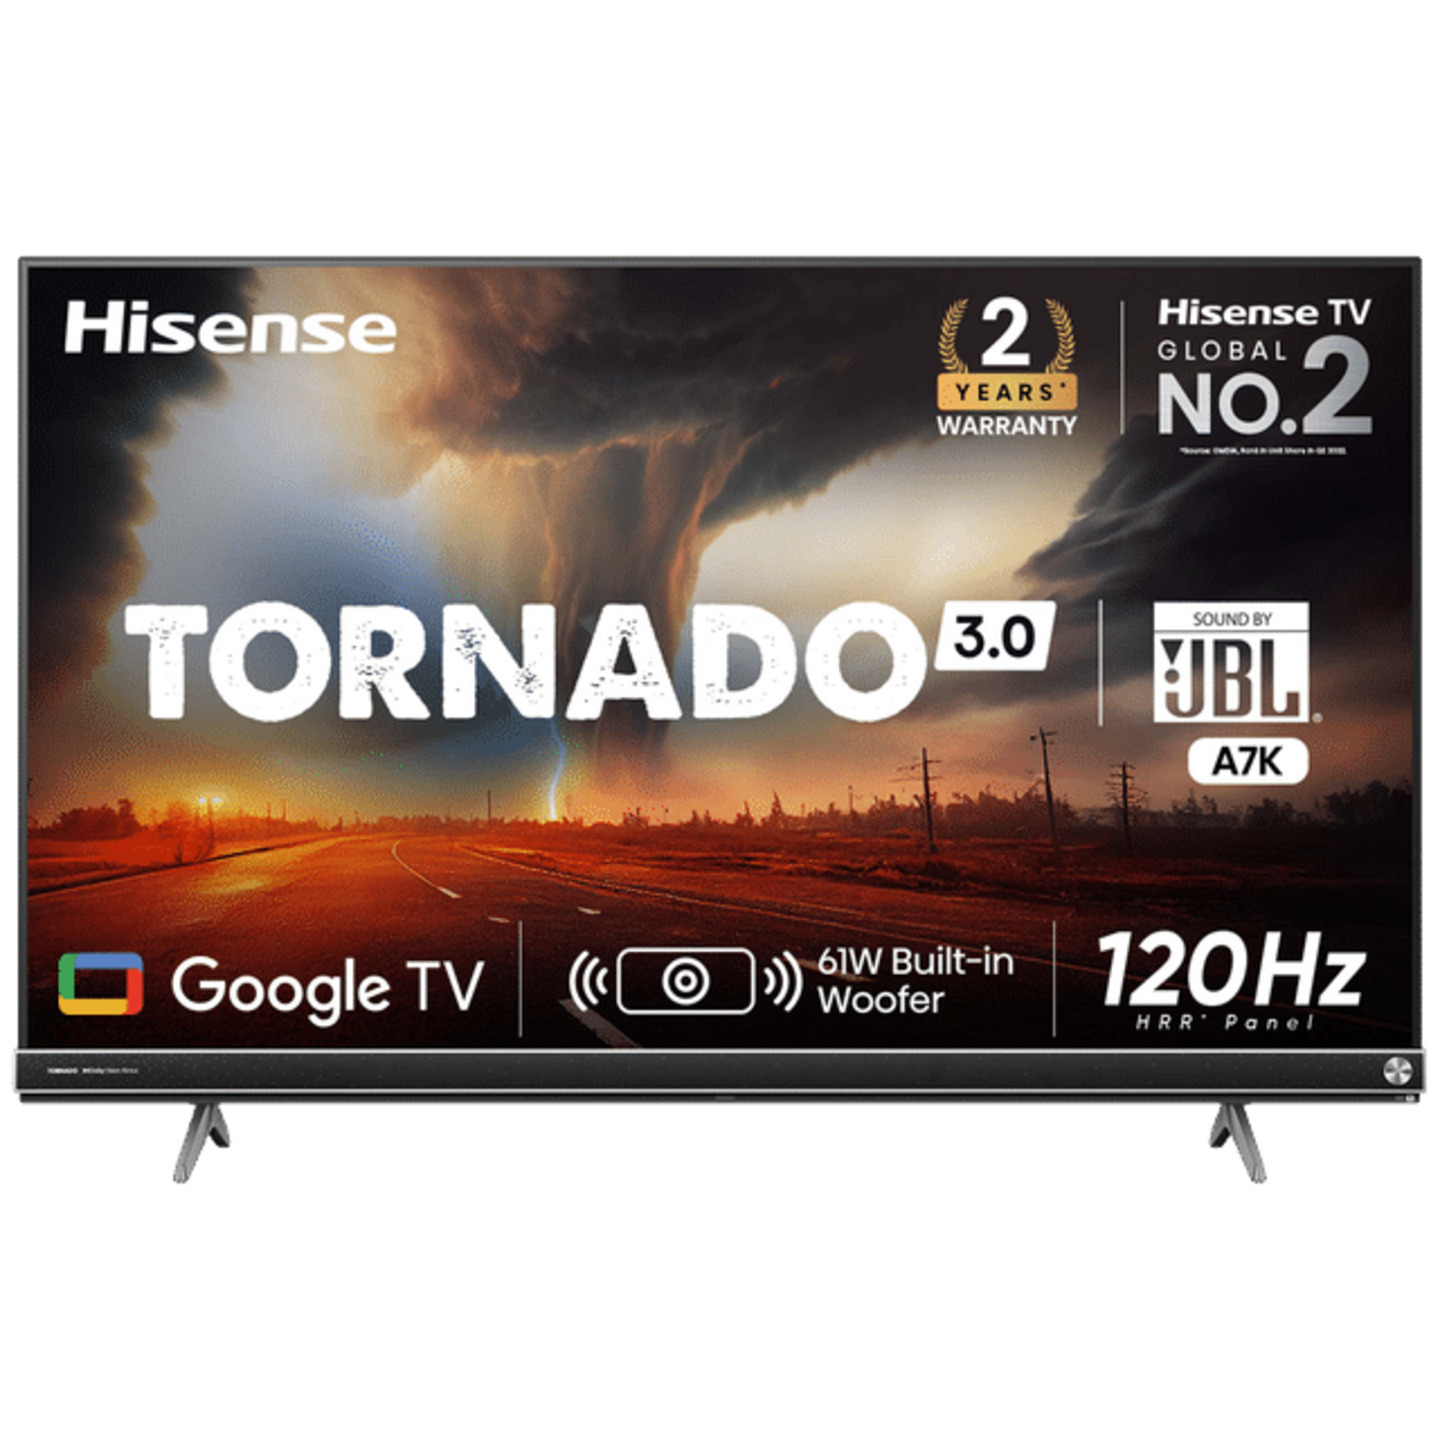 Hisense A7K 140 cm (55 inch) 4K Ultra HD LED Google TV with Dolby Vision and Dolby Atmos